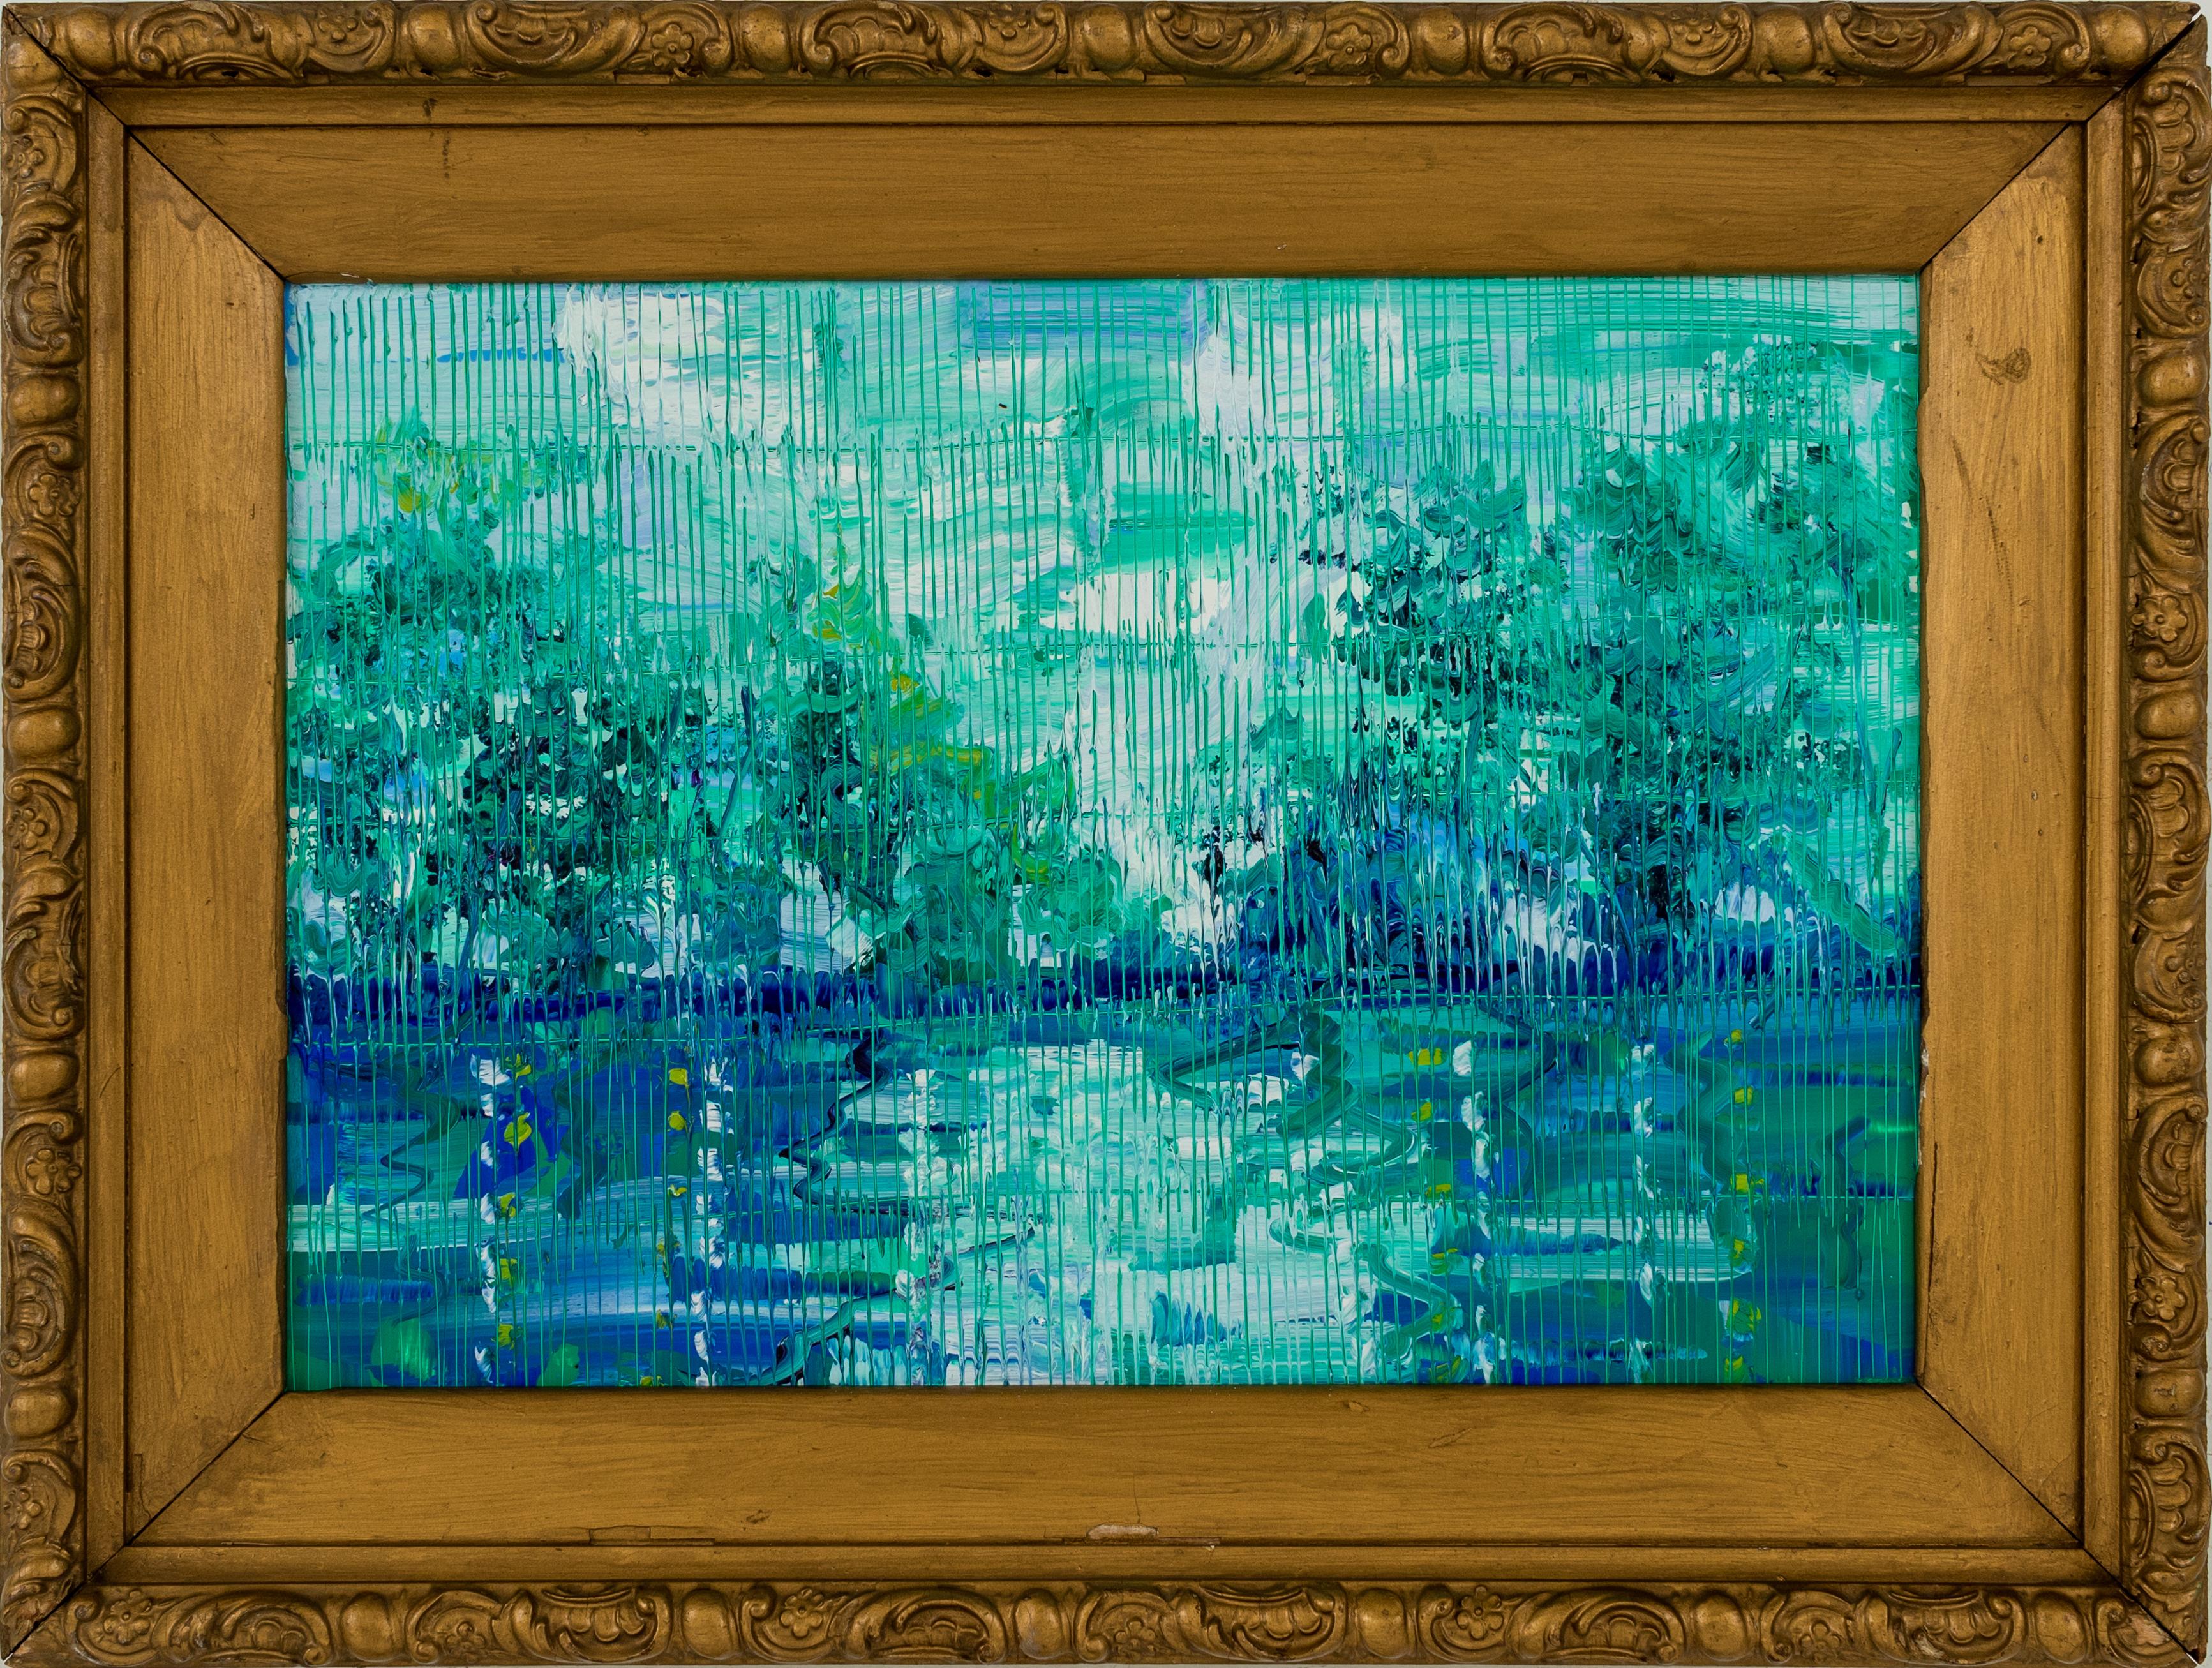 Hunt Slonem "Bayou Teche" Blue & Green Bayou
Landscape painting of Louisiana Bayou Teche in shades of blue and green scored in an antique frame

Unframed: 13.5 x 19.5 inches  
Framed: 31.5 x 27.5 inches
*Painting is framed - Please note that not all